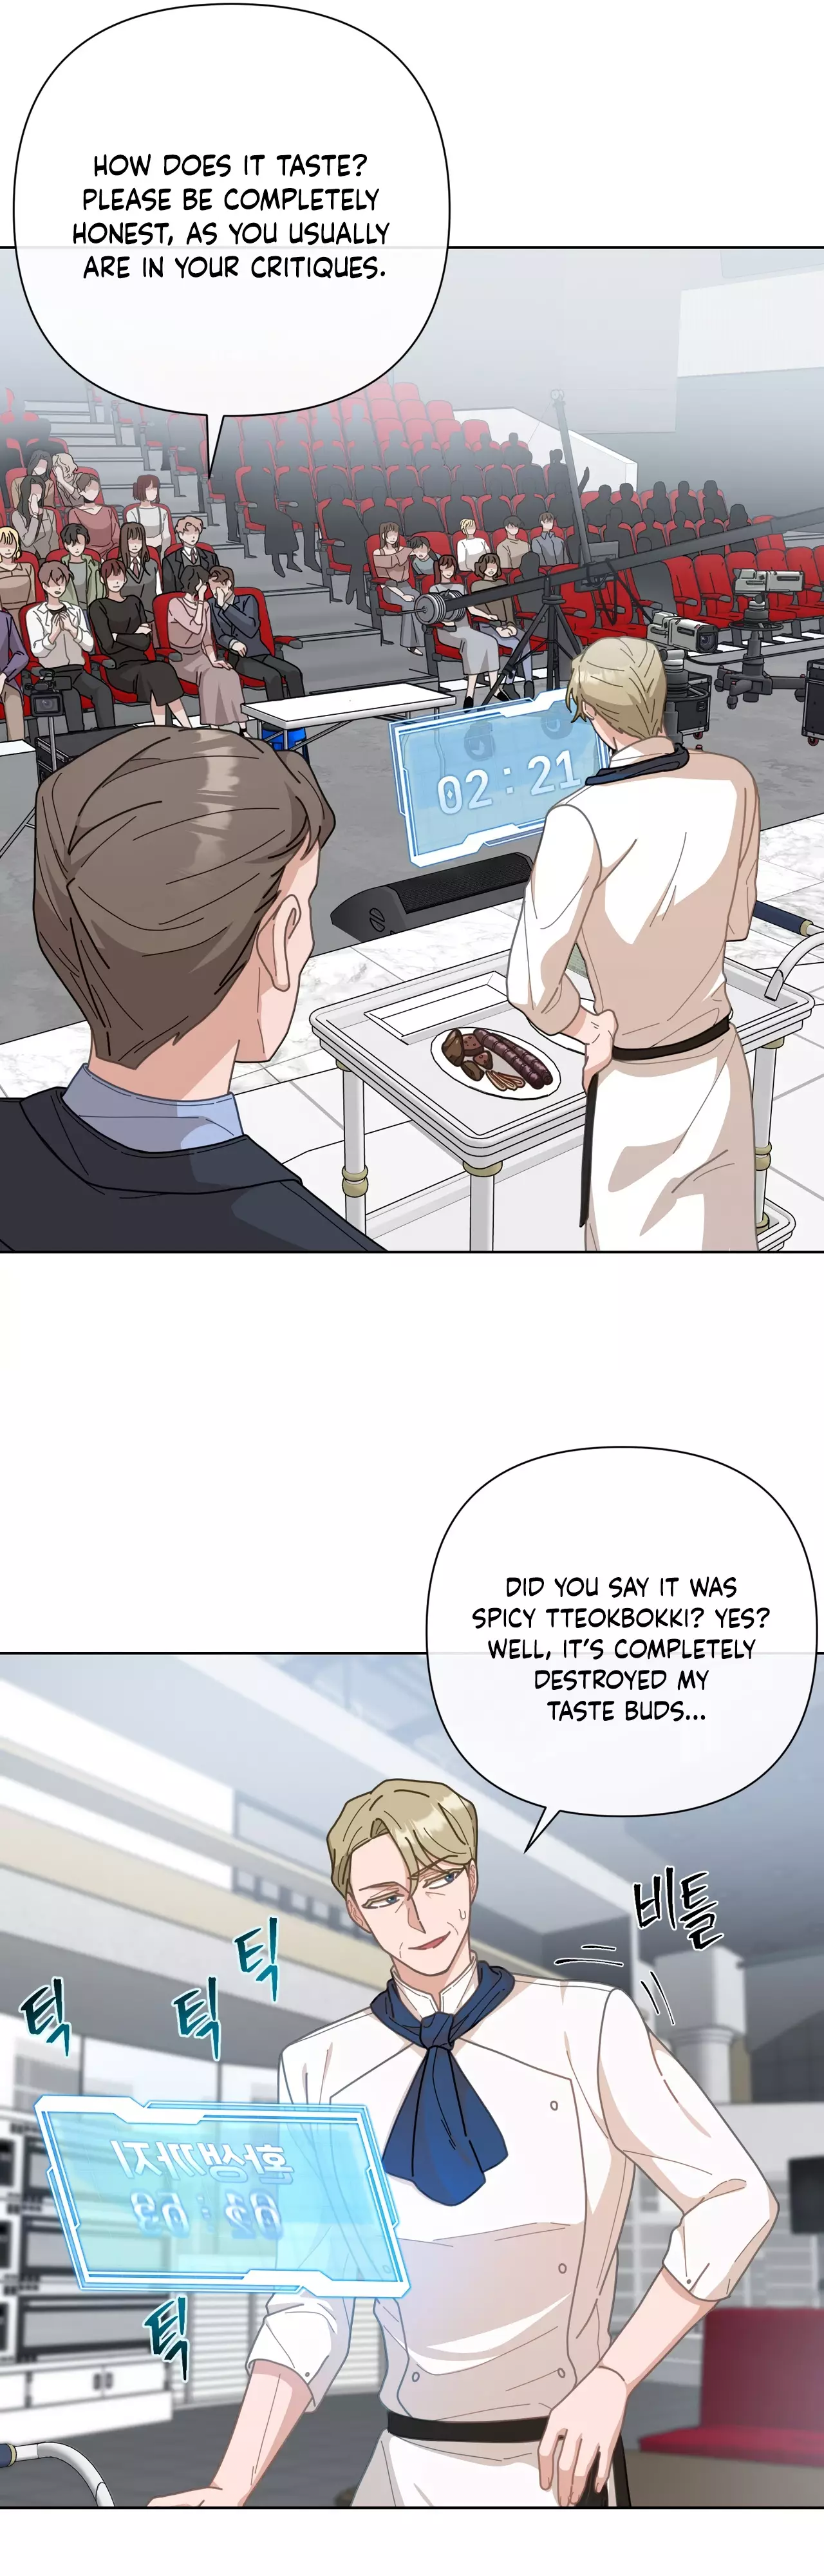 100-Year-Old Top Chef - 1 page 34-ede0d5b2